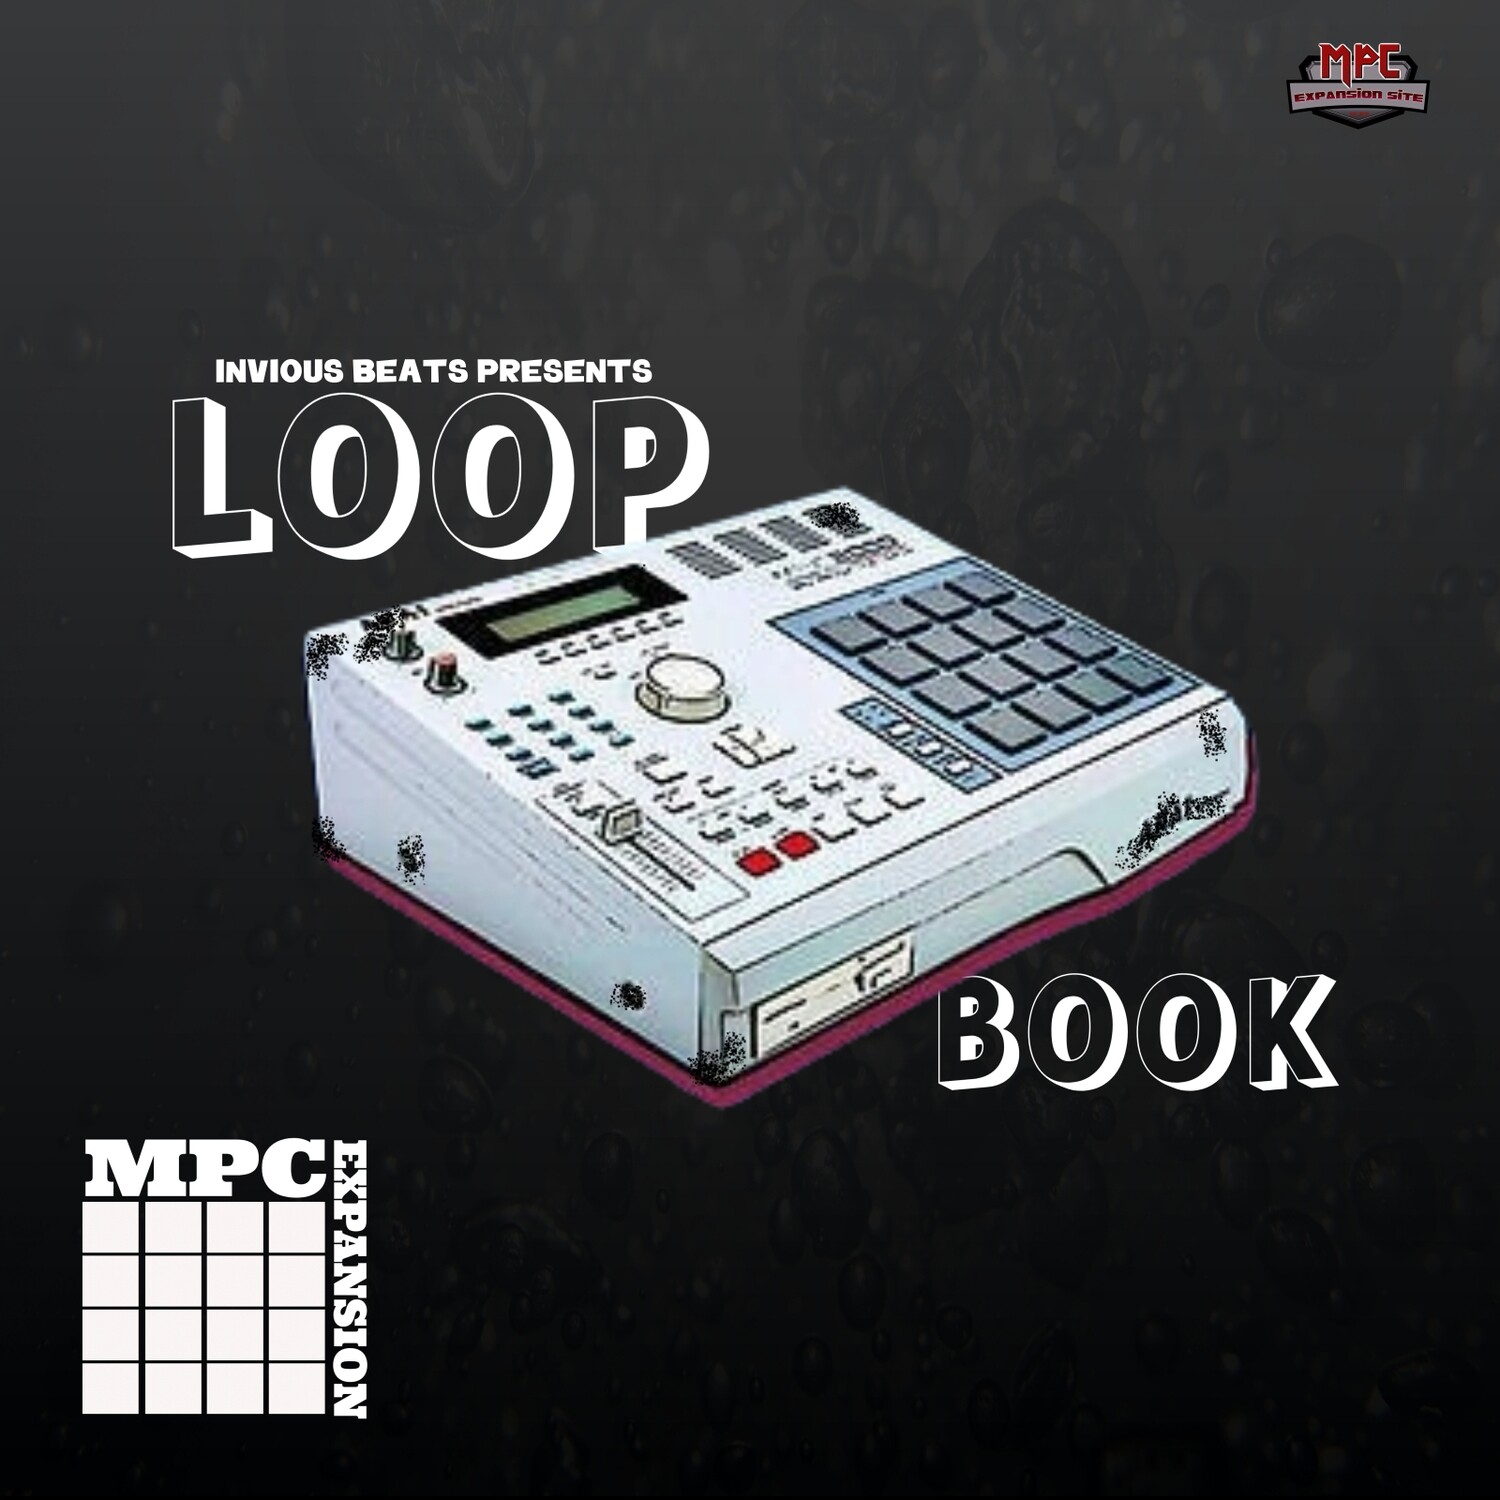 MPC EXPANSION 'LOOP BOOK' by INVIOUS